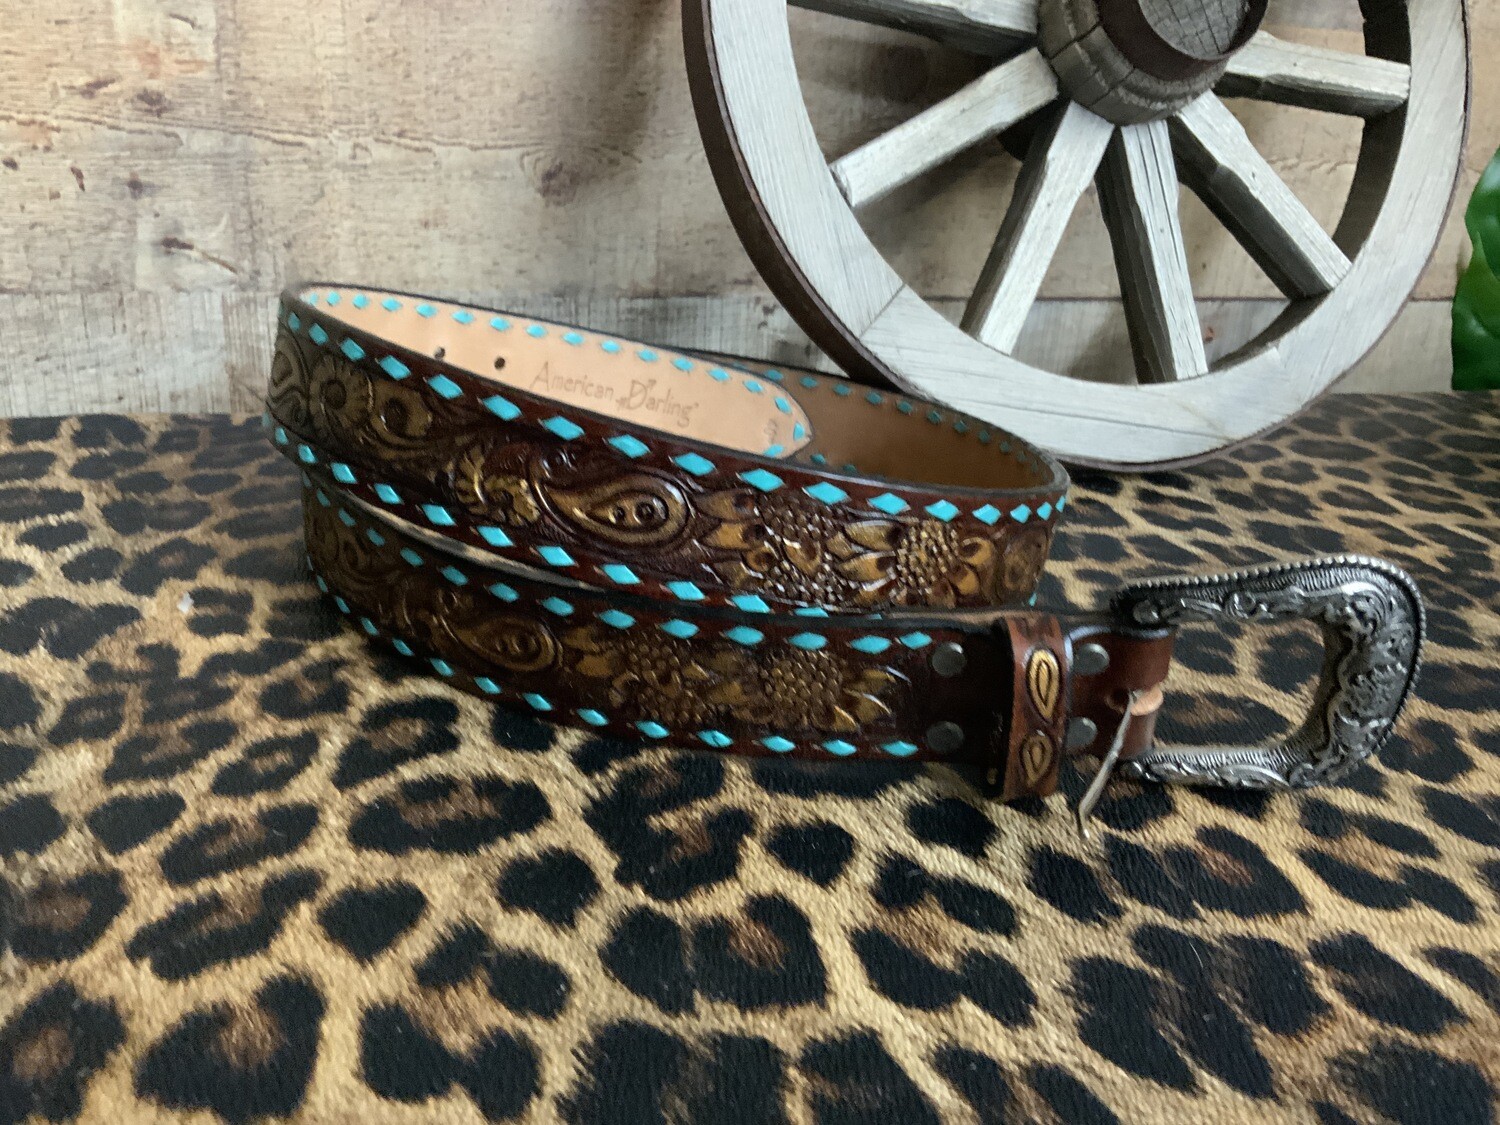 Tooled Leather Belts with Turquoise Stitching